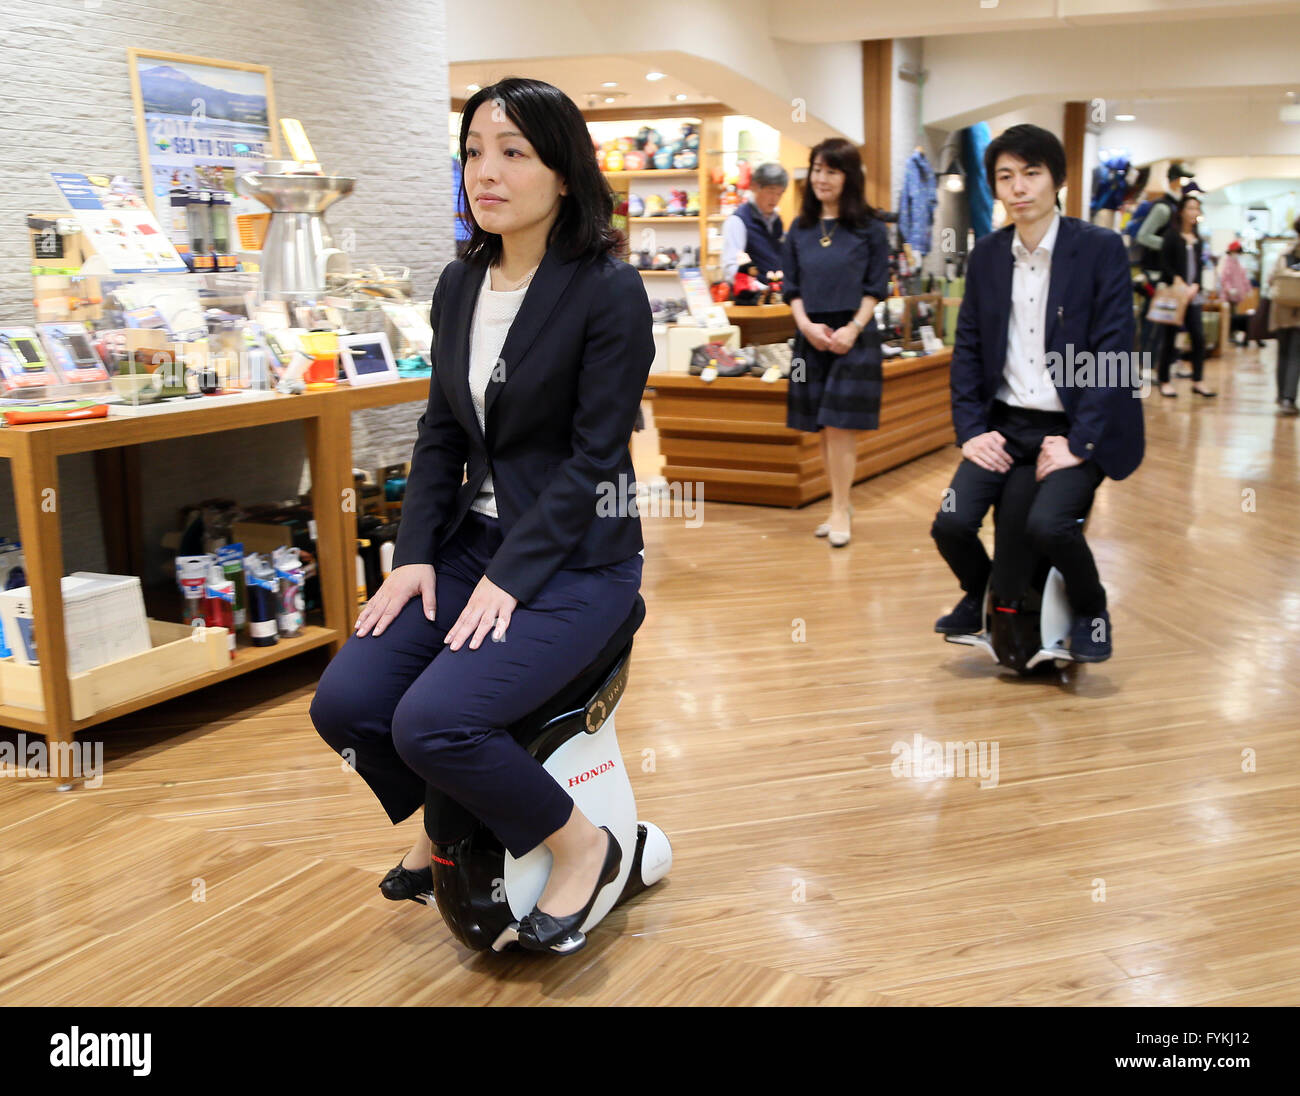 Tokyo, Japan. 27th Apr, 2016. Japan's Mitsukoshi department store employees demonstrate personal mobility devices 'Uni-Cub beta', developed by Japanese auto giant Honda Motor at the Hajimarino Cafe of the main store of Mitsukoshi in Tokyo on Wednesday, April 27, 2016. The Mitsukoshi and Honda started customer services using the saddle style mobility, such as test drive inside the department store. Credit:  Yoshio Tsunoda/AFLO/Alamy Live News Stock Photo